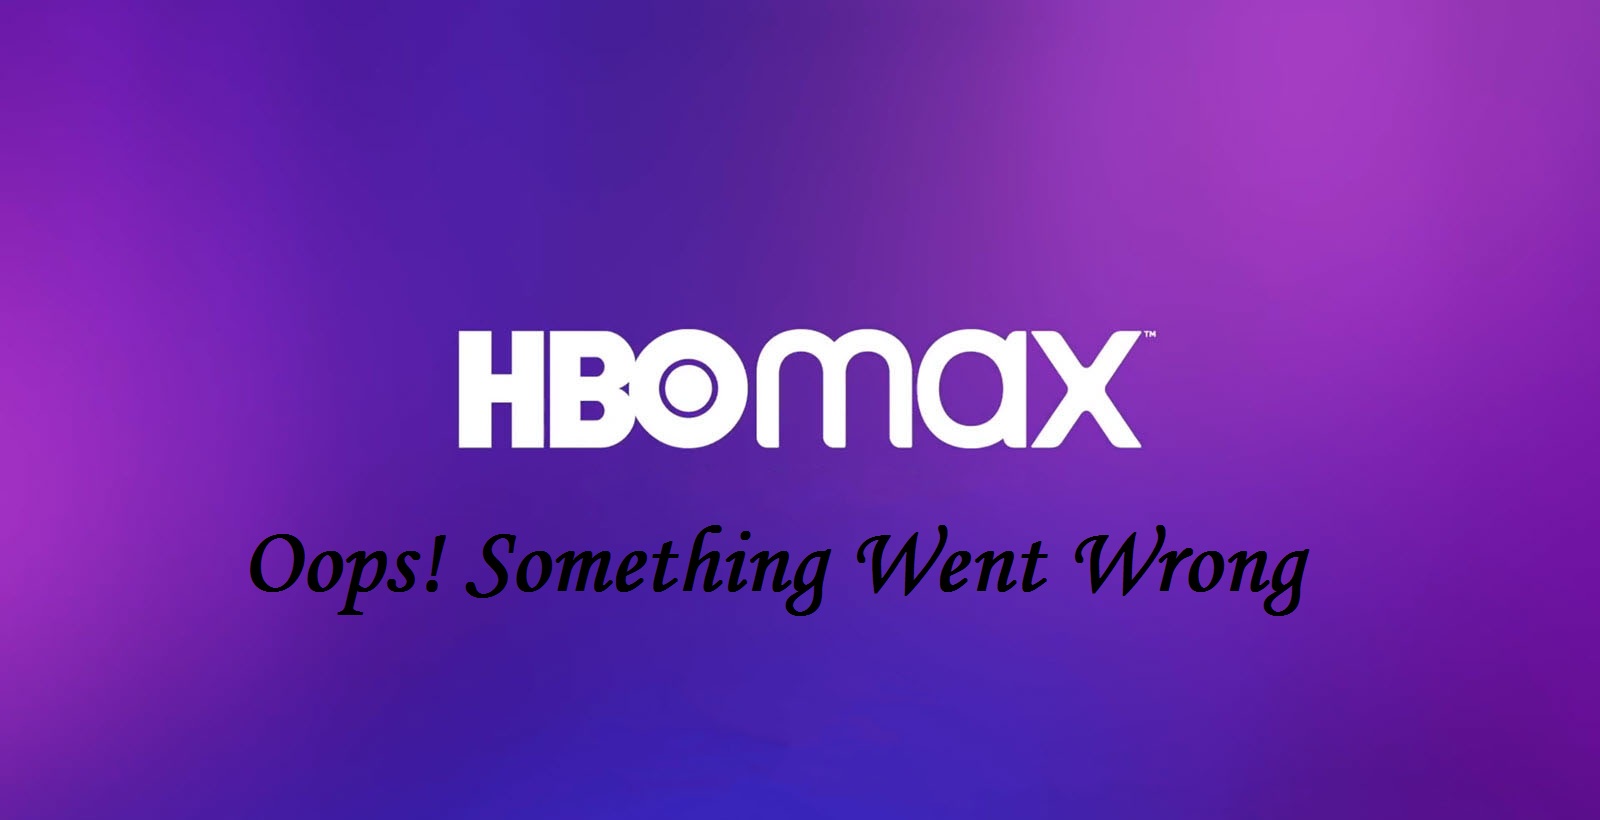 HBO Max Oops Something Went Wrong